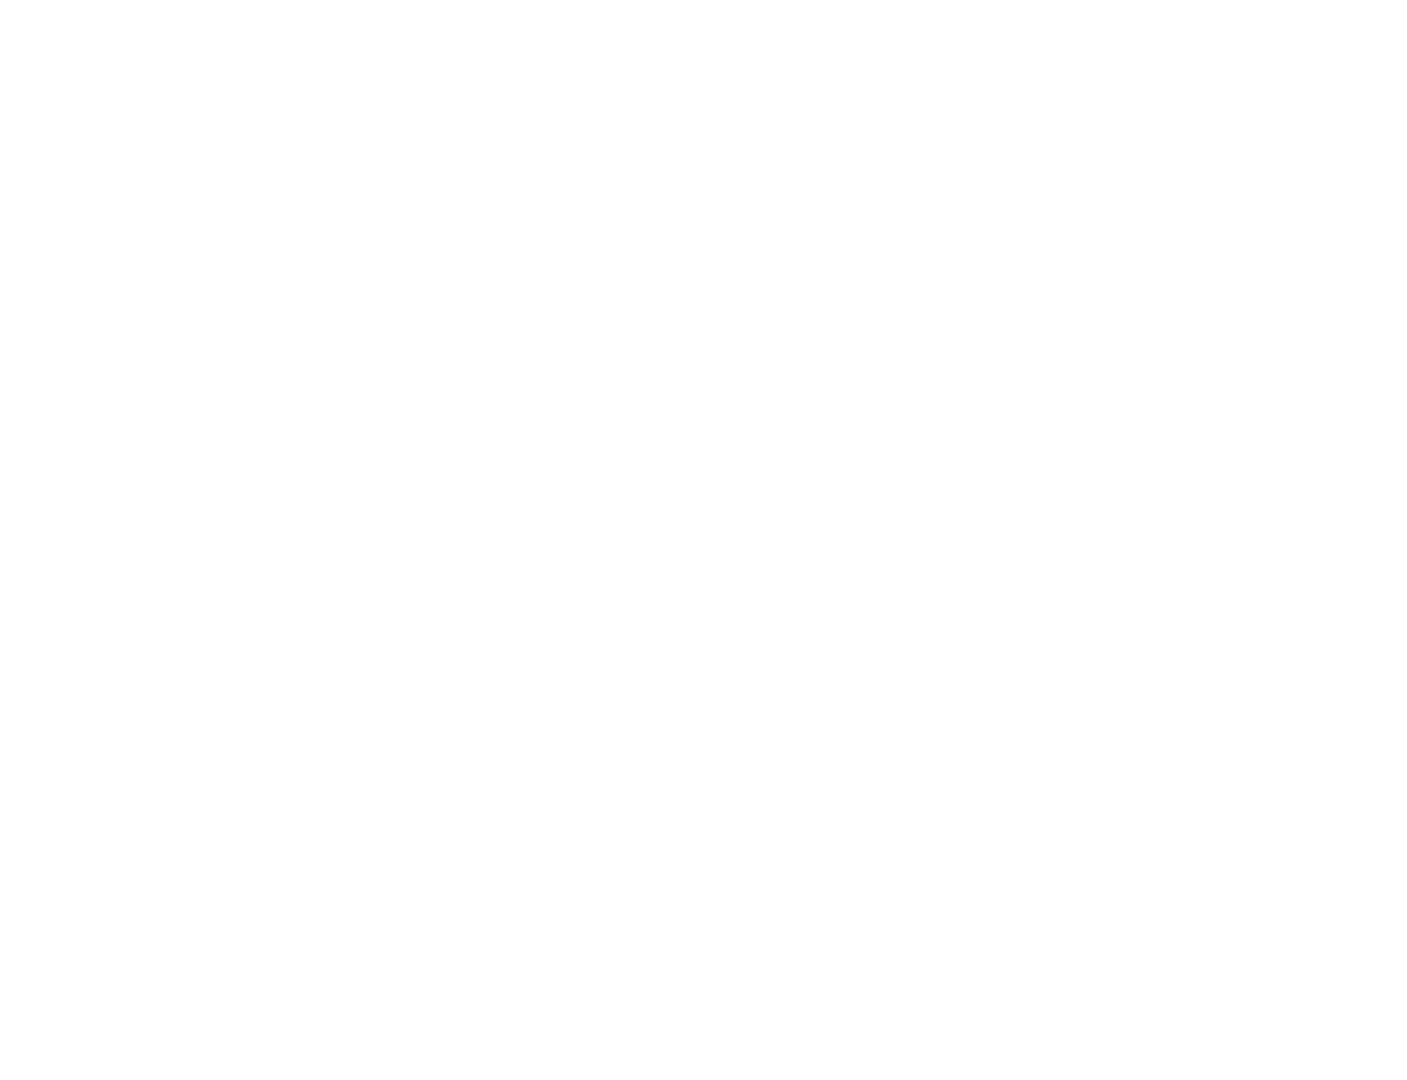 Integrity Roofing and Construction Ltd.